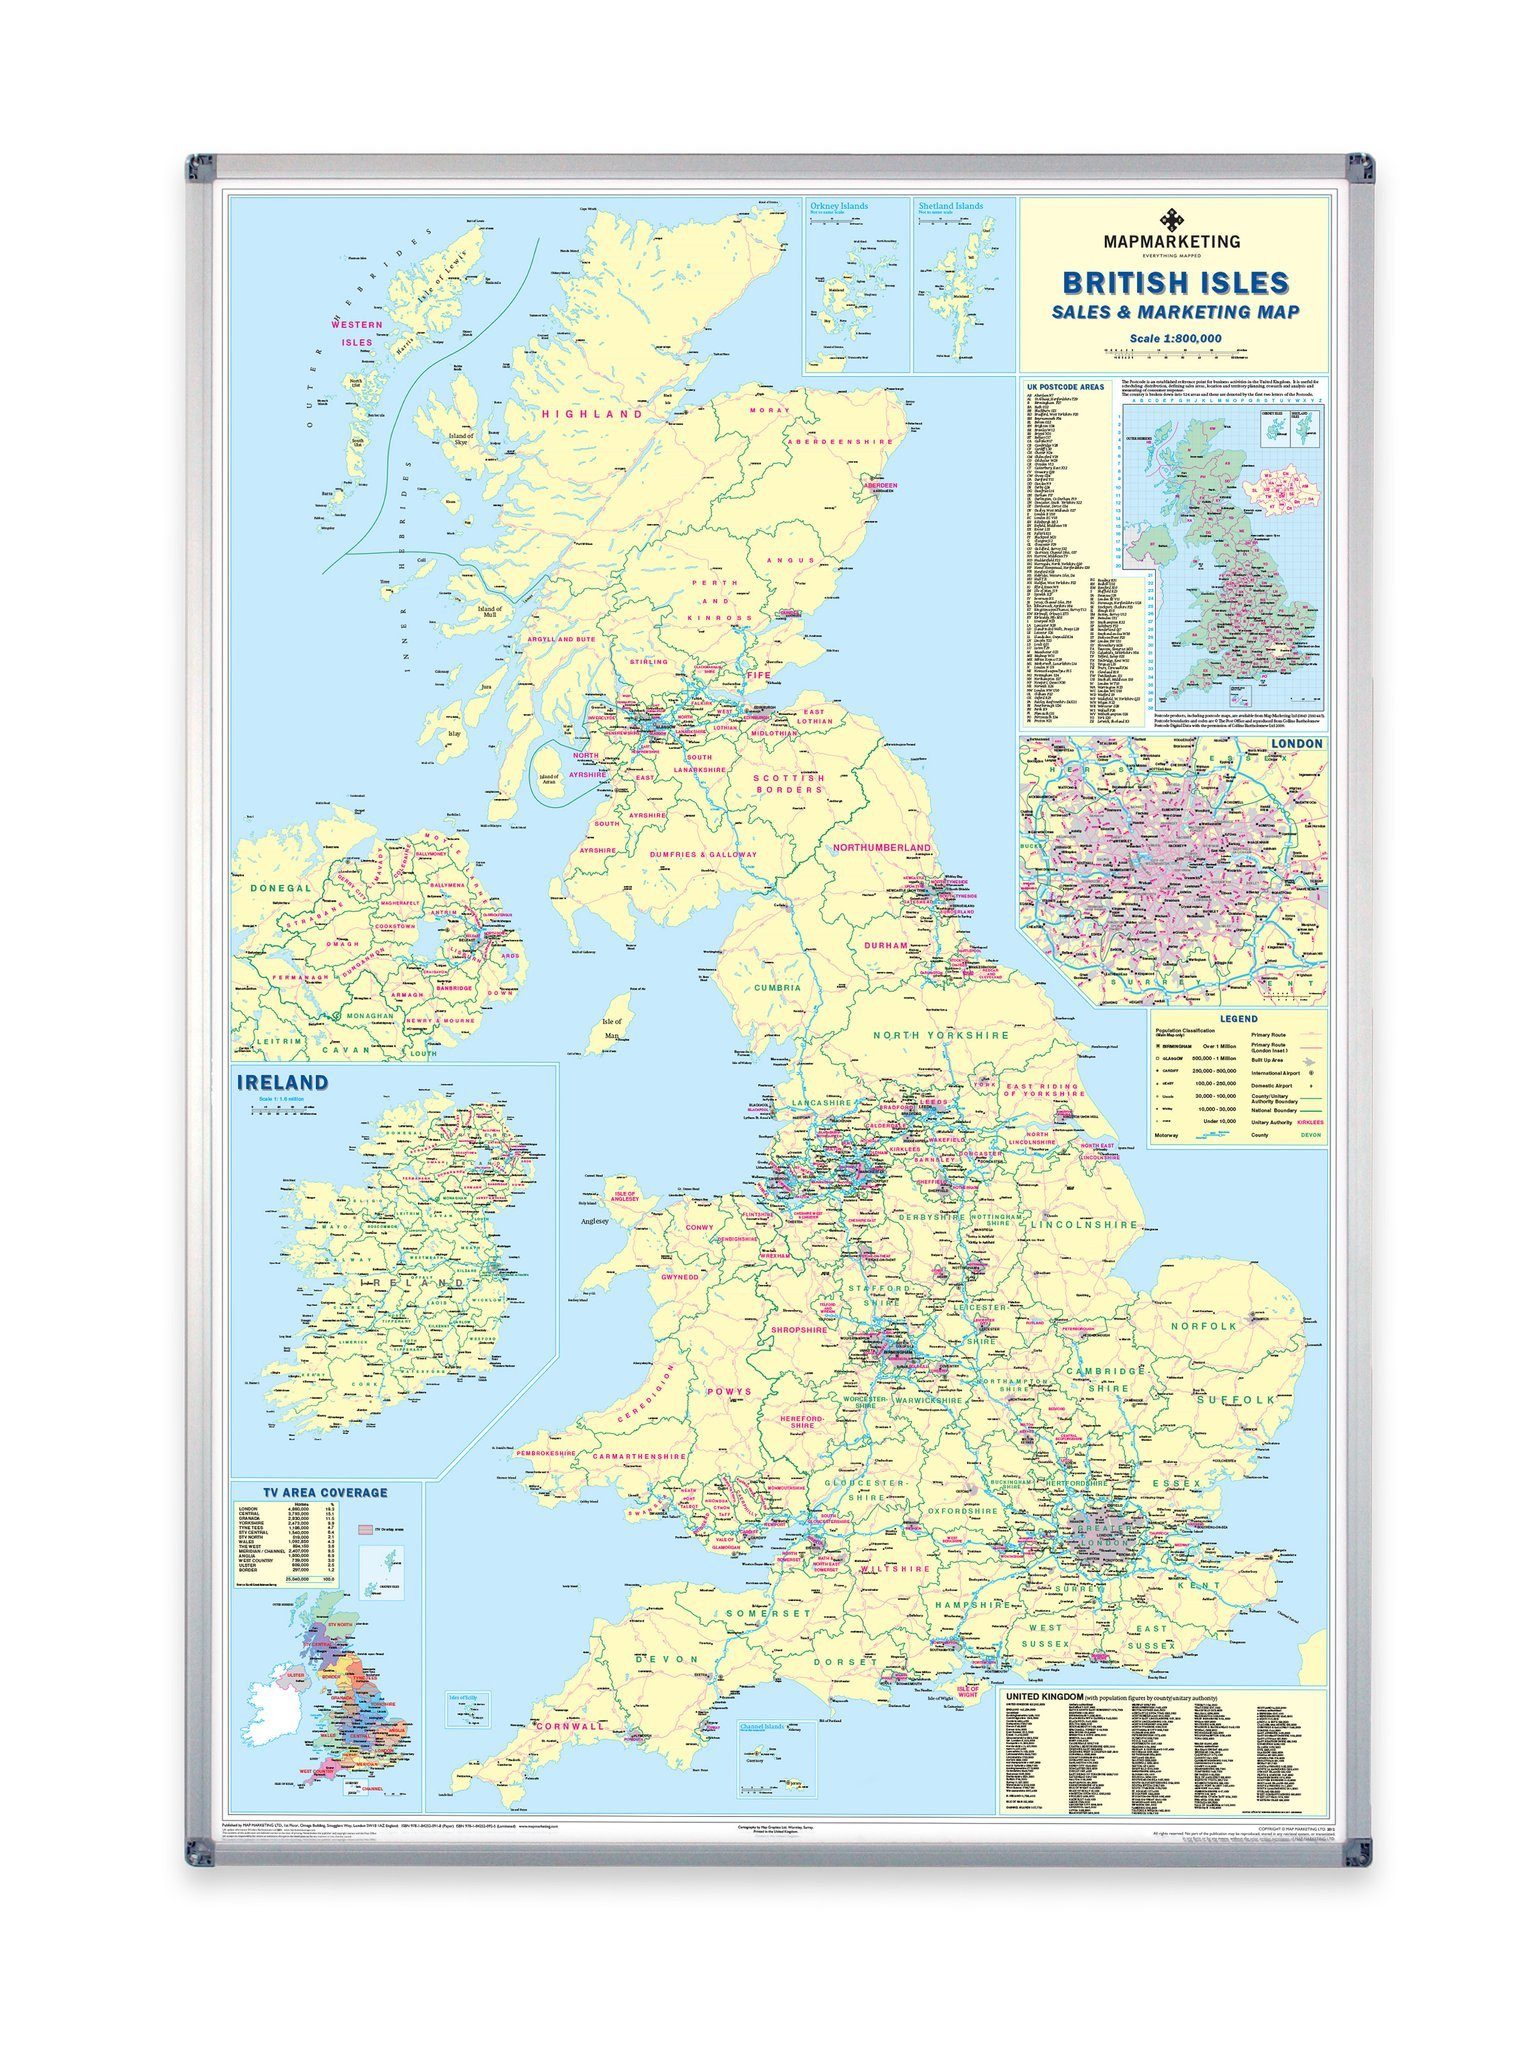 Wall Maps - Supersize UK Sales And Marketing Wall Map